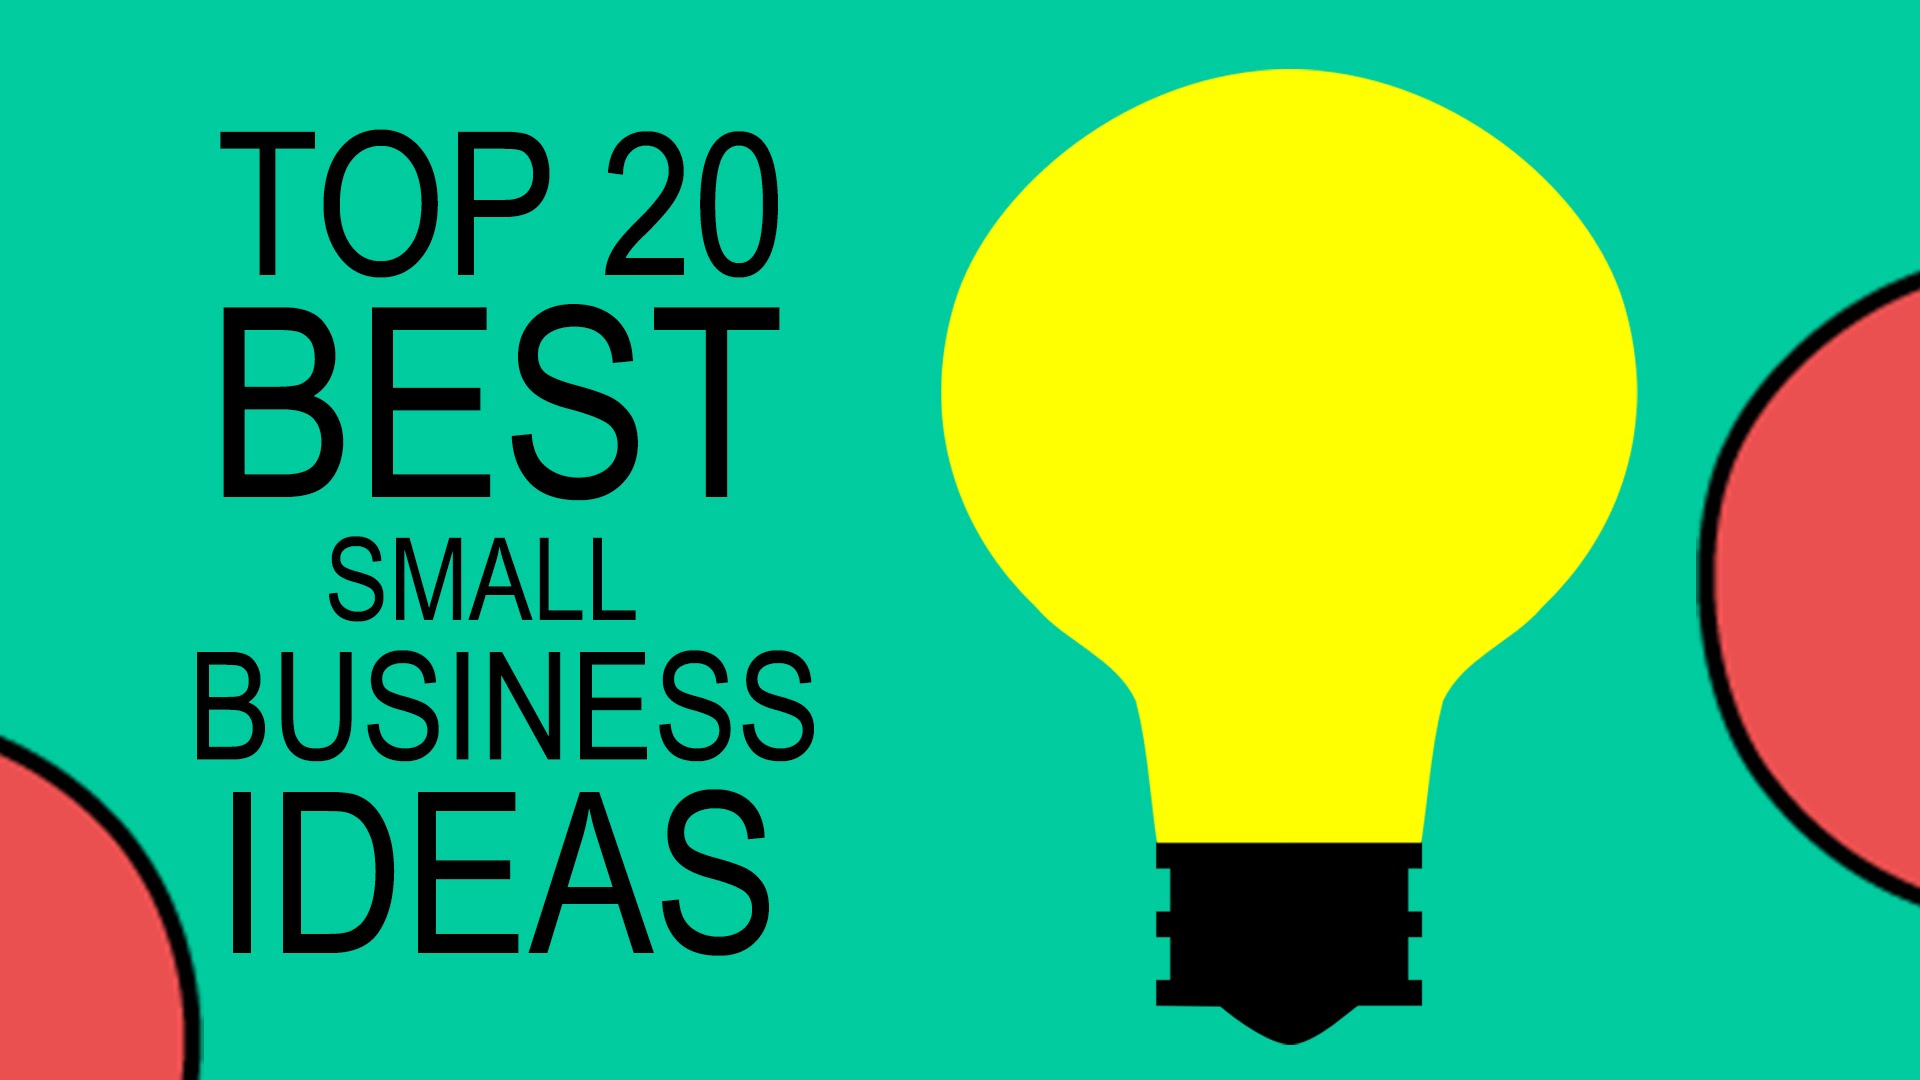 Your Choices for the Best Business Ideas